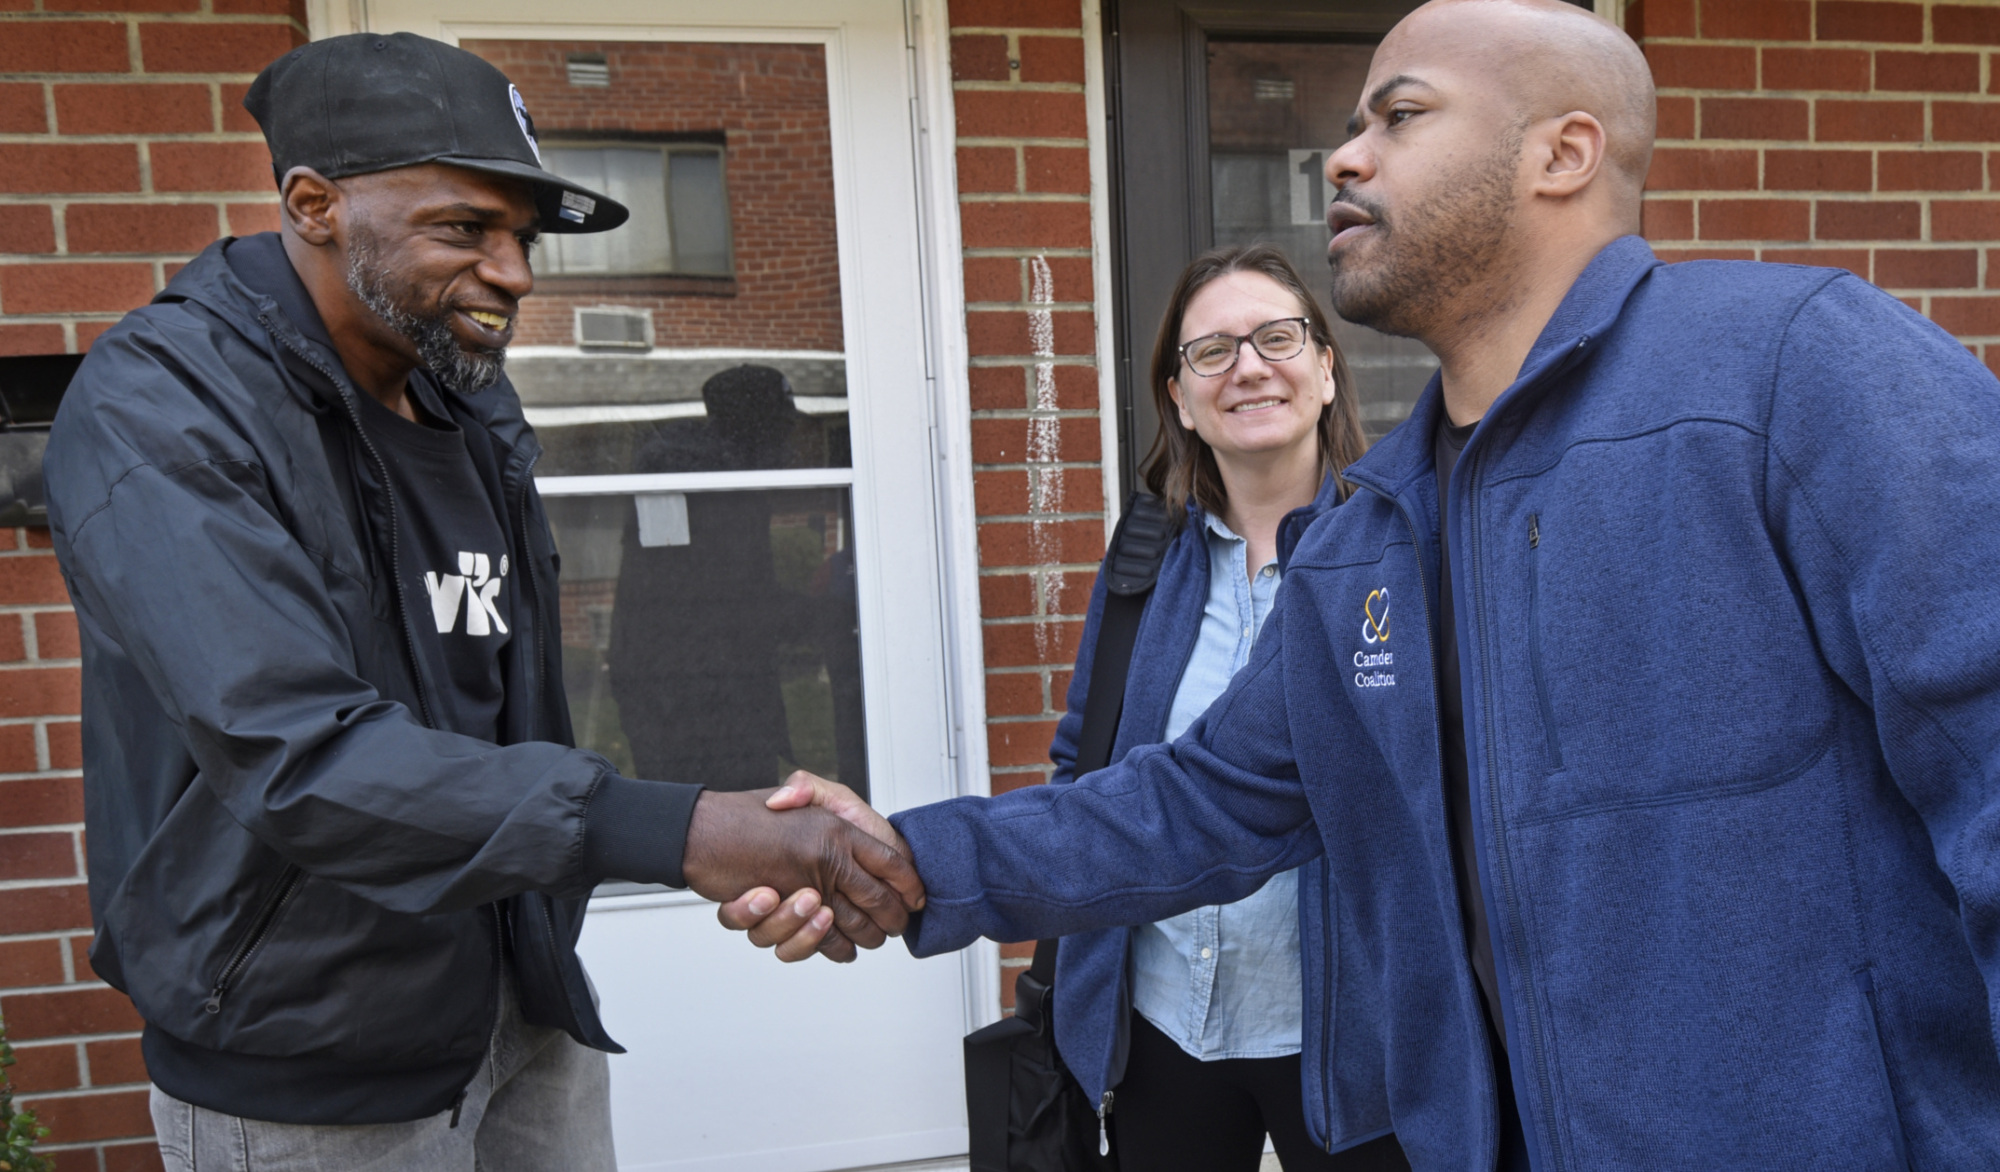 Camden Coalition care team member shakes hands with care management participant outside his apartment as a second care team member looks on